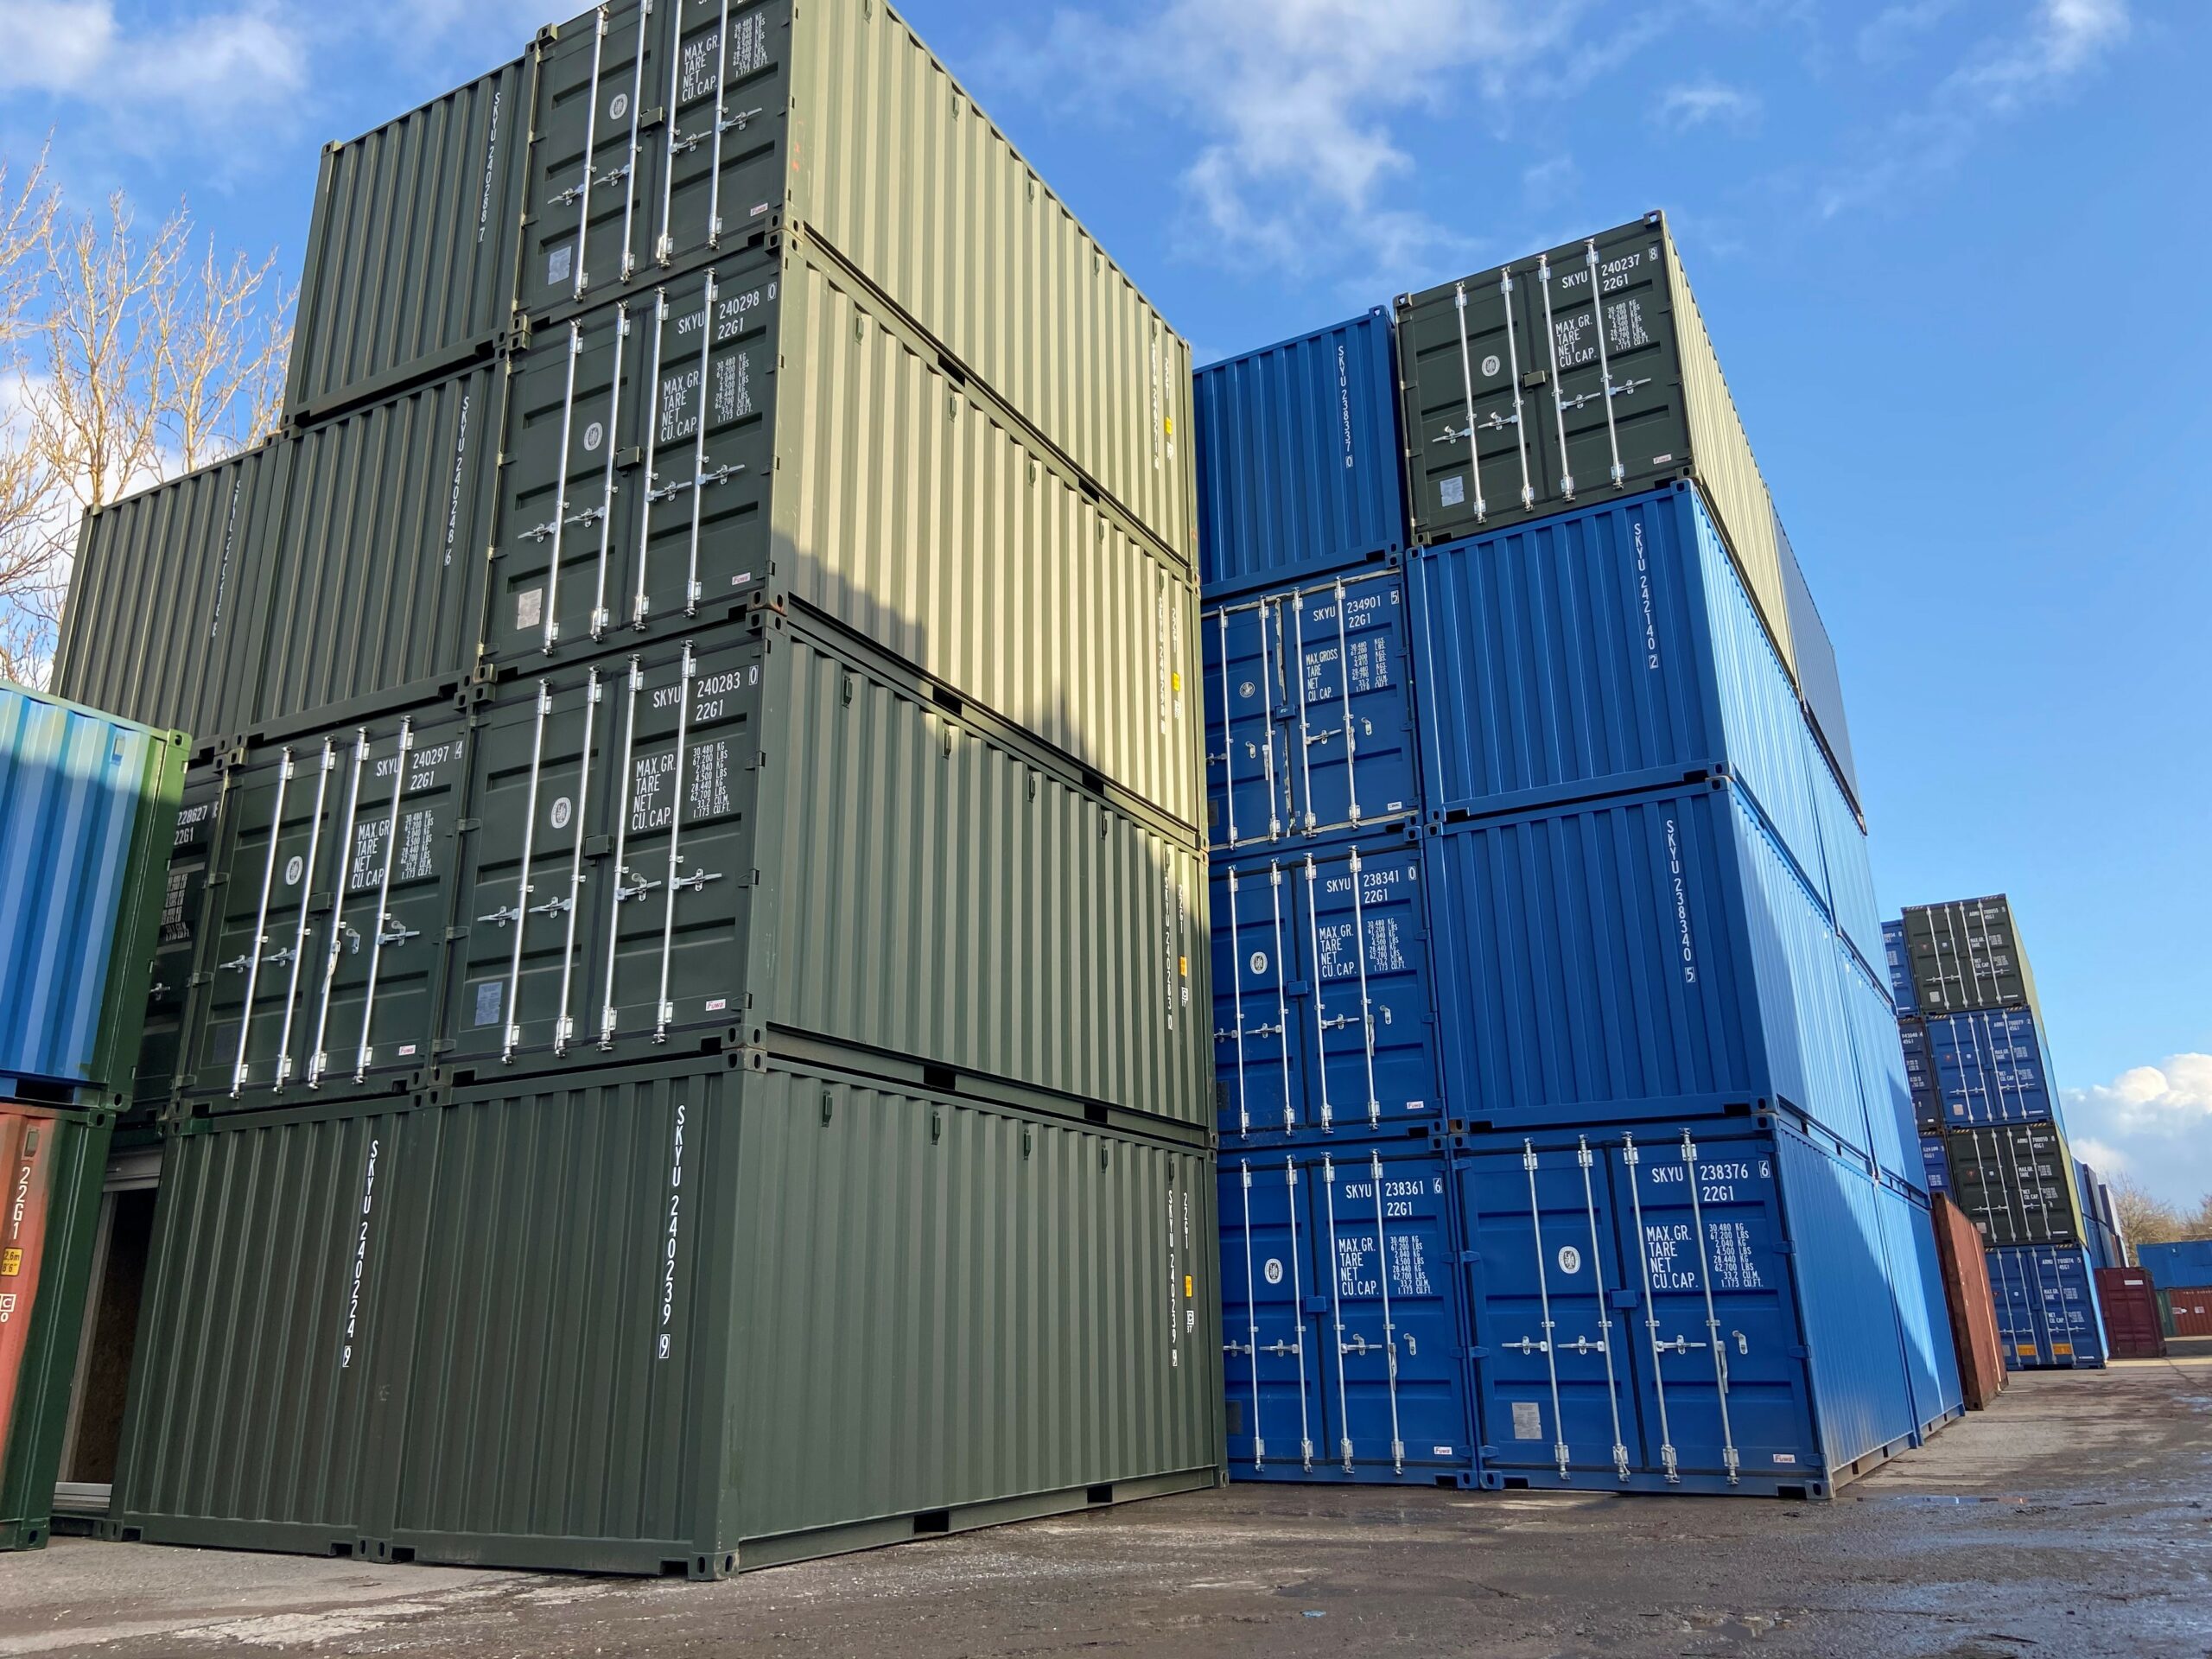 Shipping container hire in Leeds